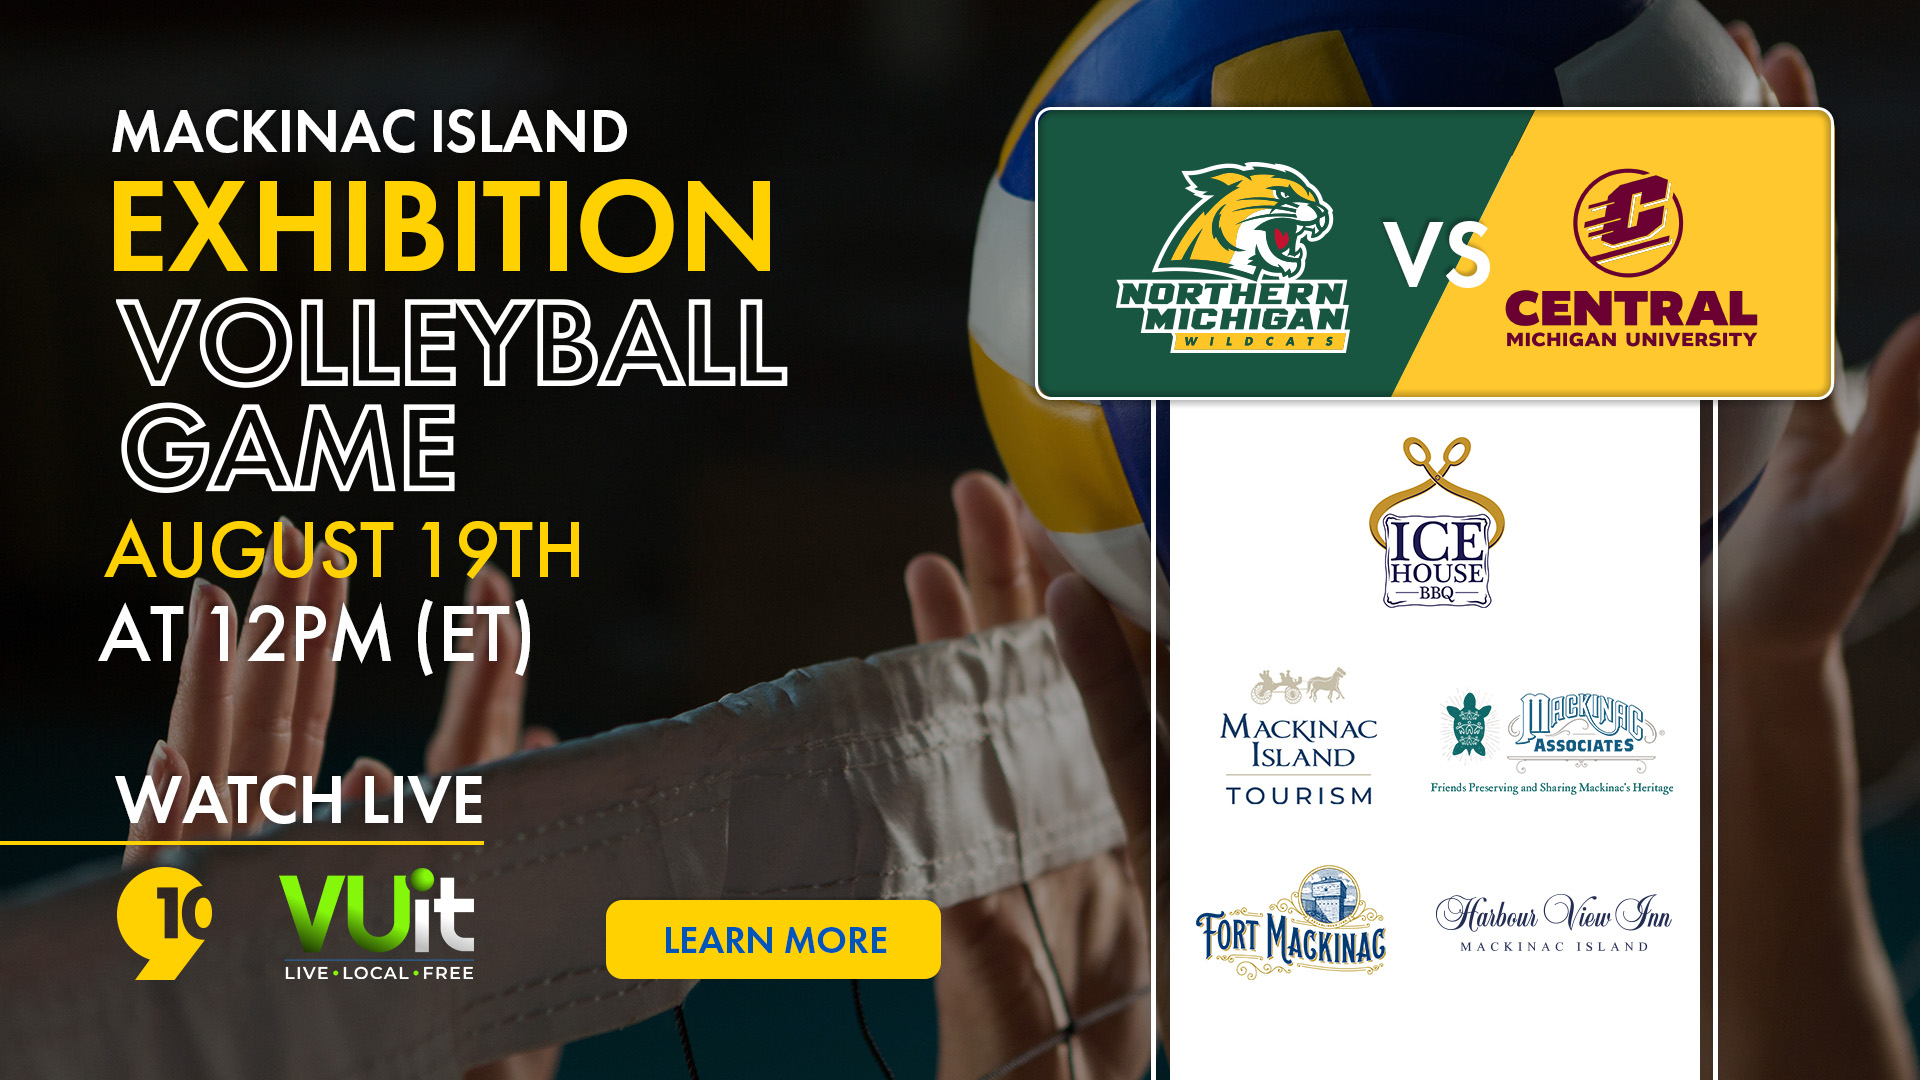 Exhibition Volleyball Game — August 19th At 12PM ET